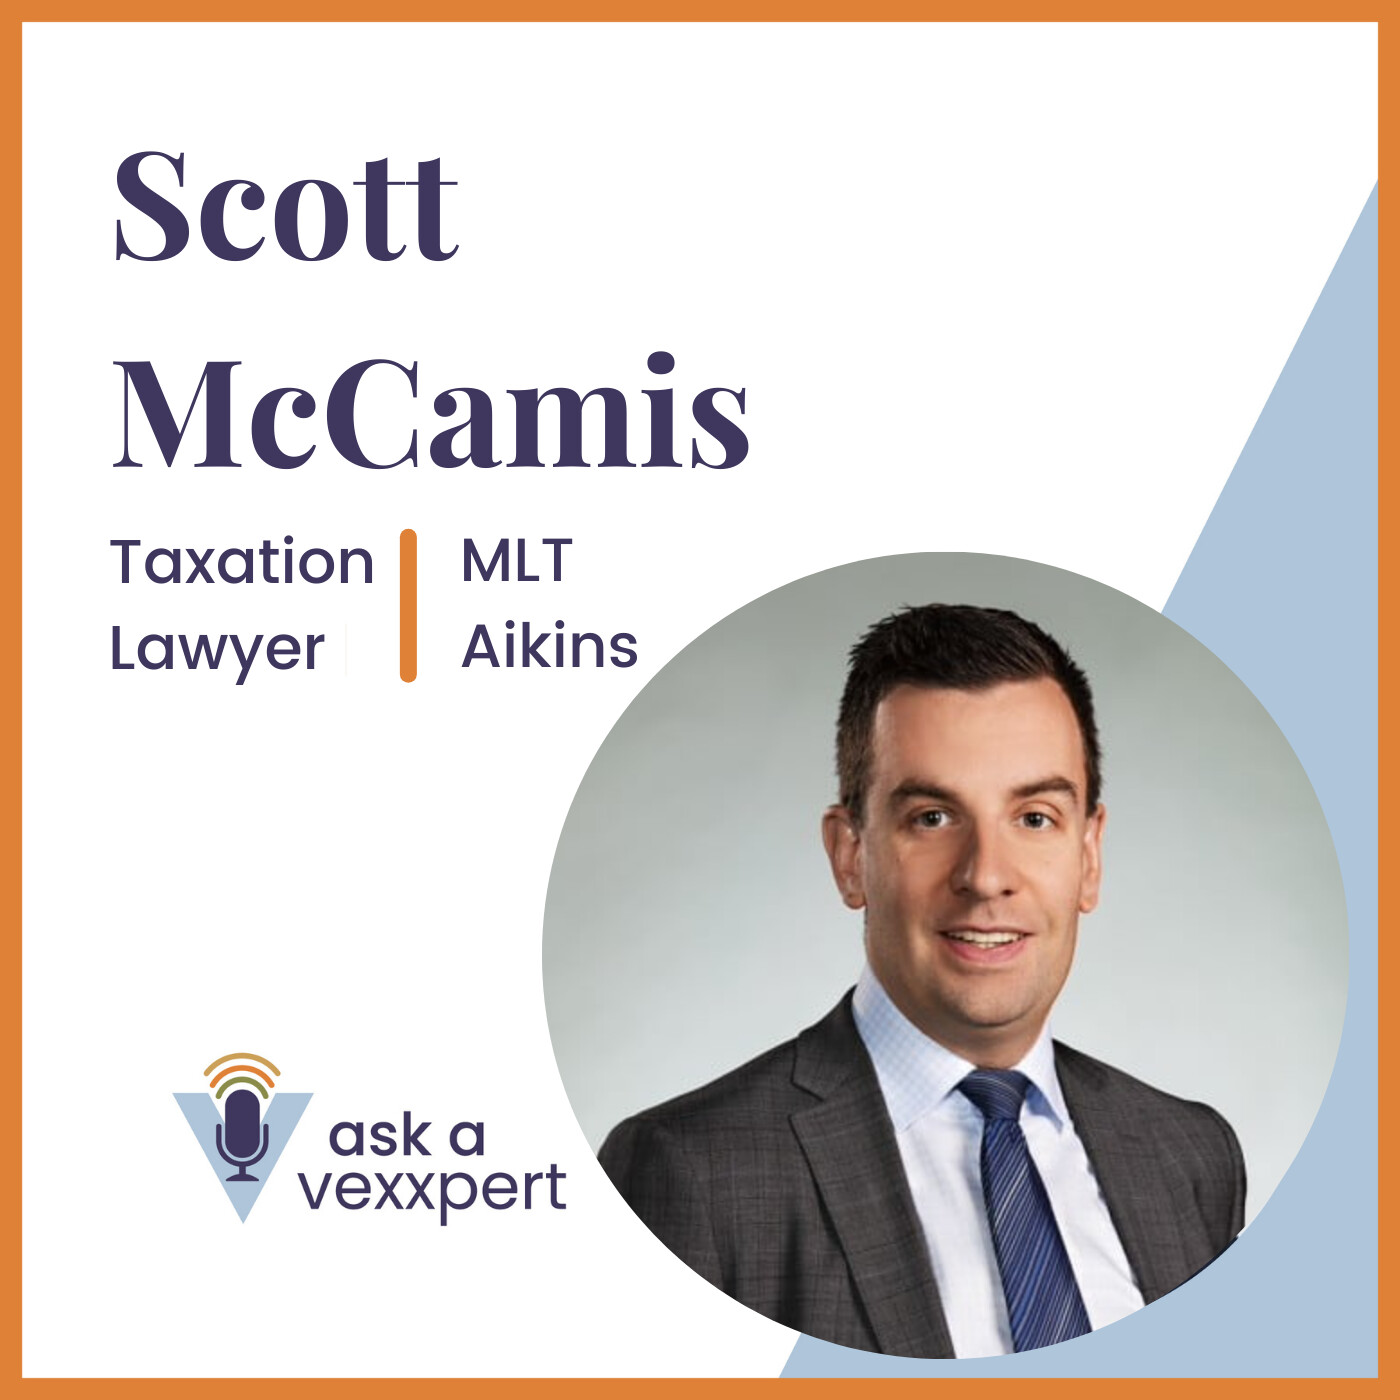 Saving Money With Tax Planning featuring Scott McCamis Image